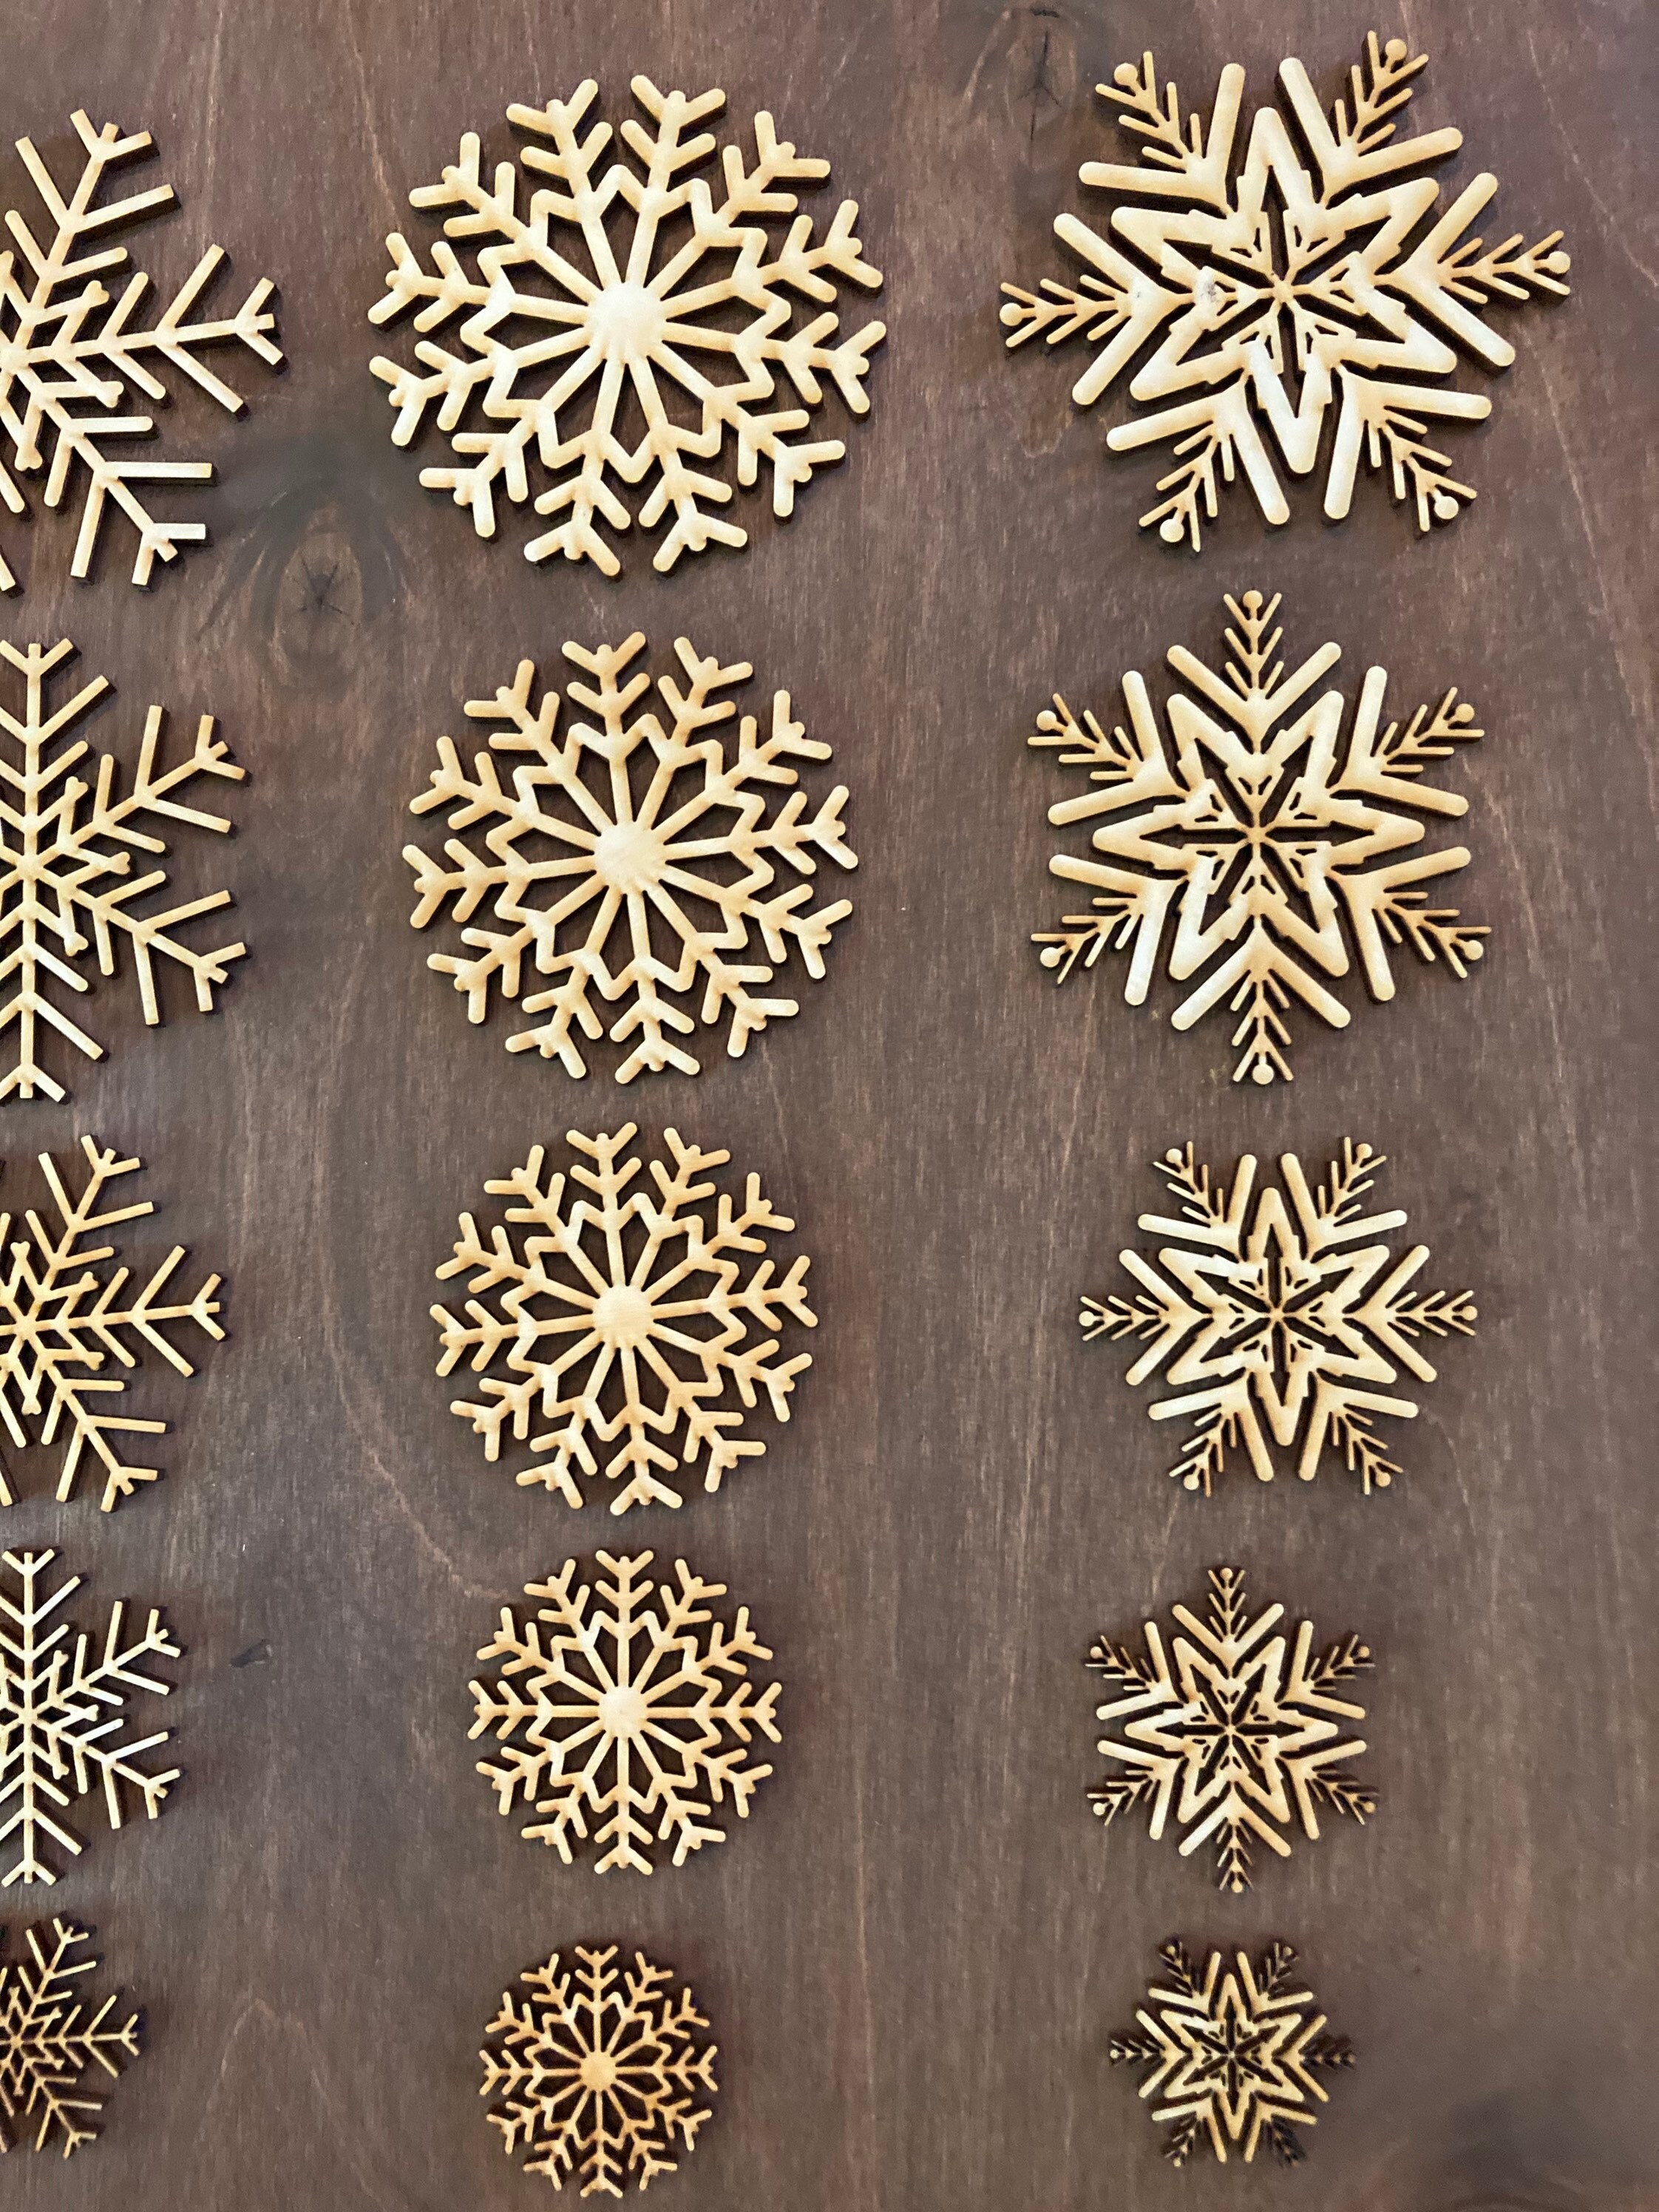 Laser Cut Snowflakes, Unfinished Laser Cut Shapes, Snowflakes, Supplies for  DIY, Winter Craft Supply, Craft Supplies, DIY, Let It Snow 